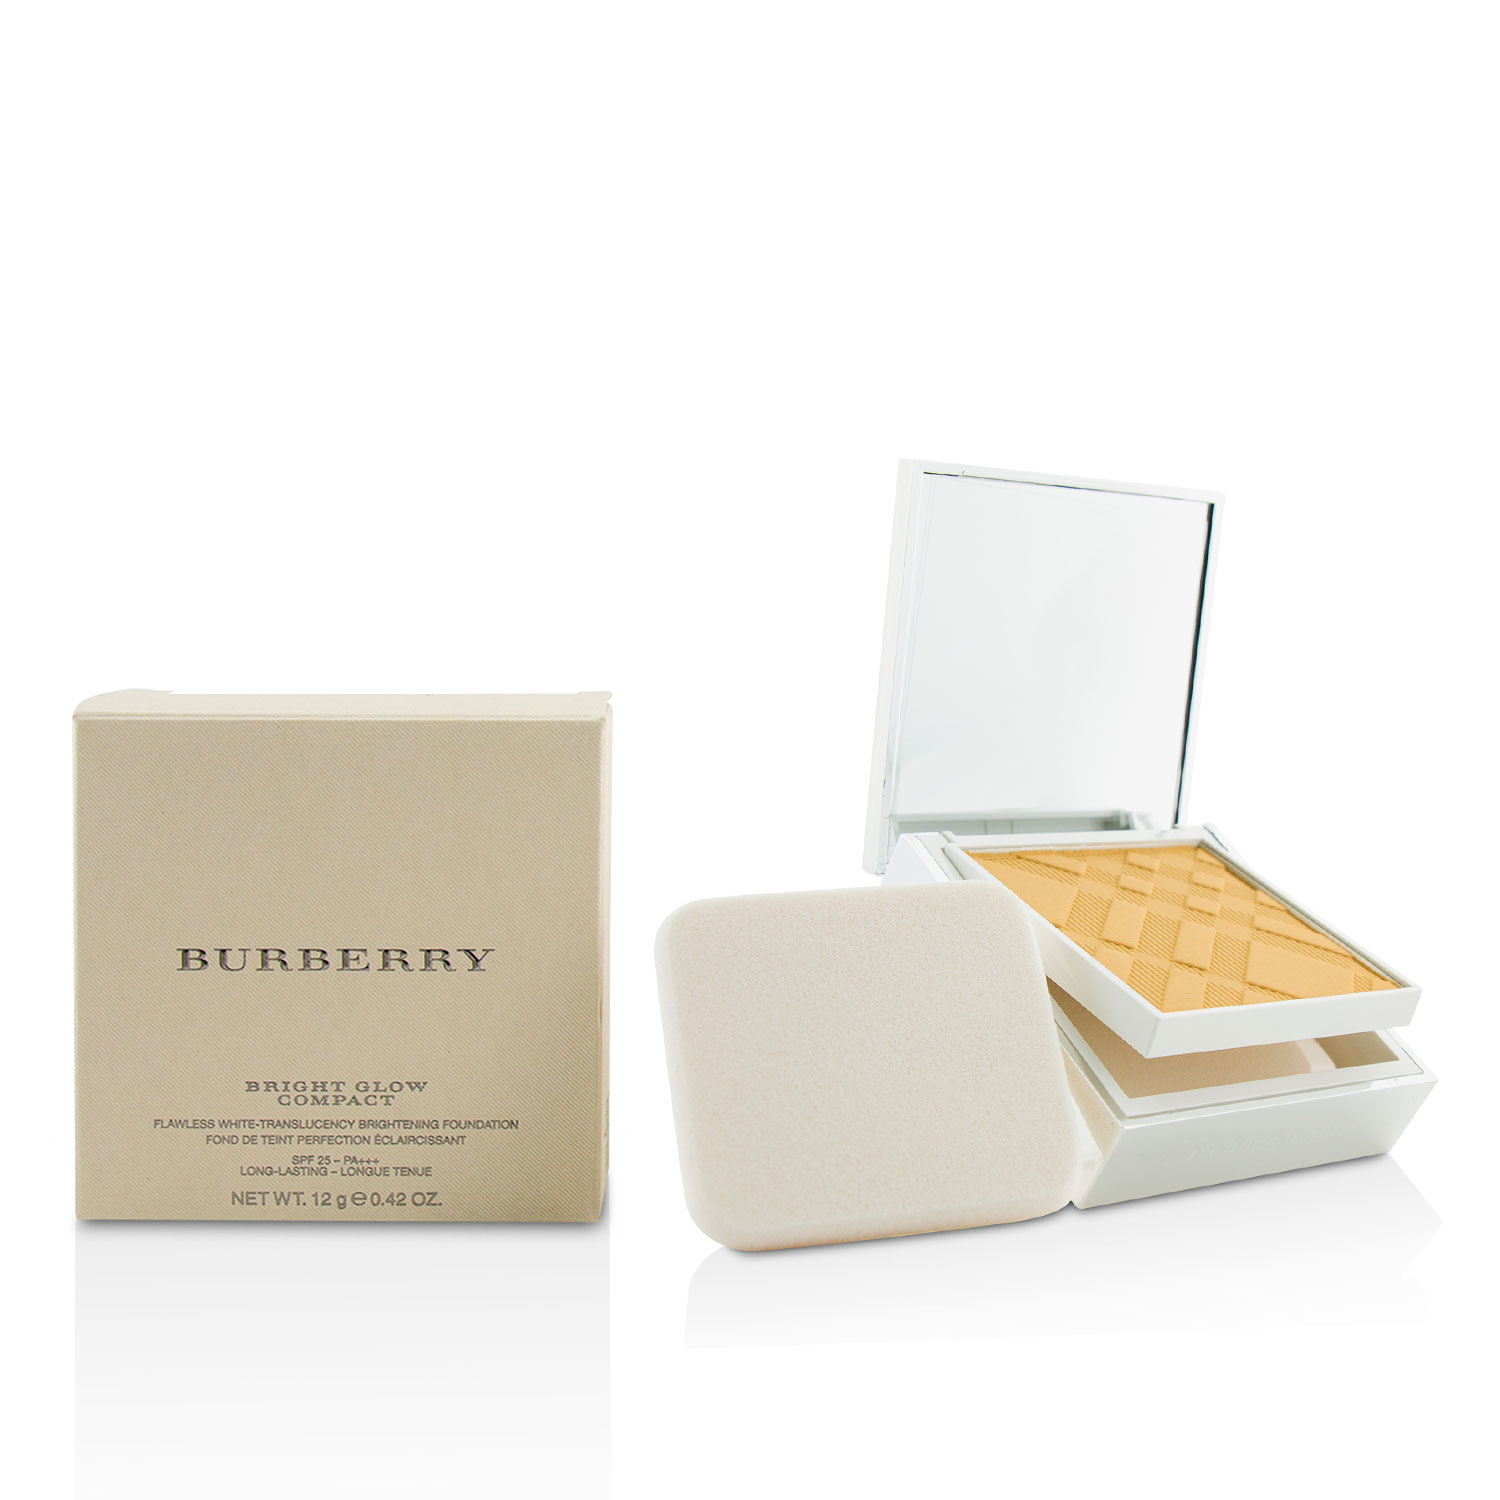 Bright Glow Flawless White Translucency Brightening Compact Foundation SPF 25 - # No. 31 Rosy Nude Burberry Image